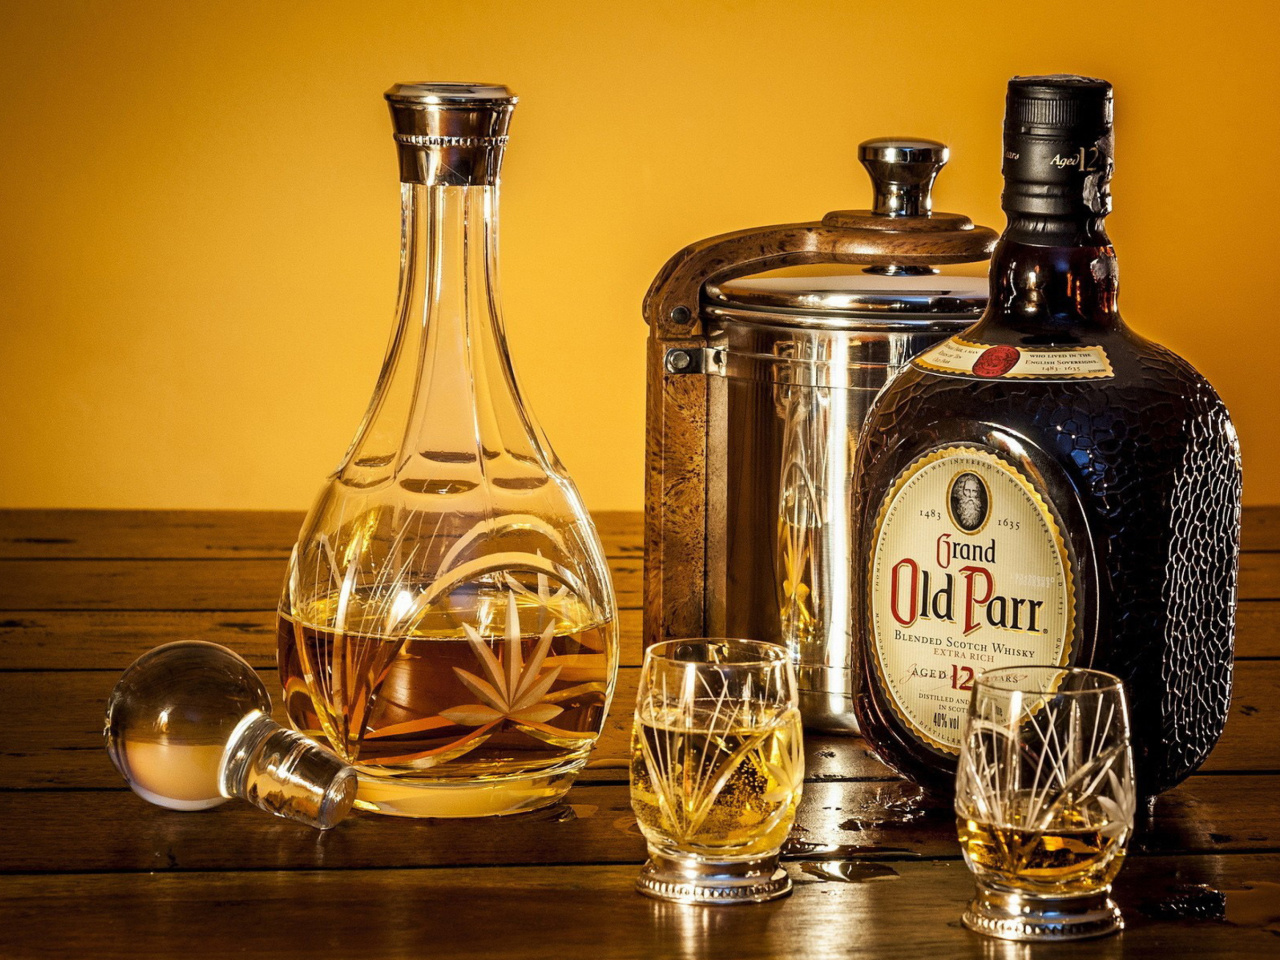 Das Grand Old Parr Blended Scotch Whisky Wallpaper 1280x960